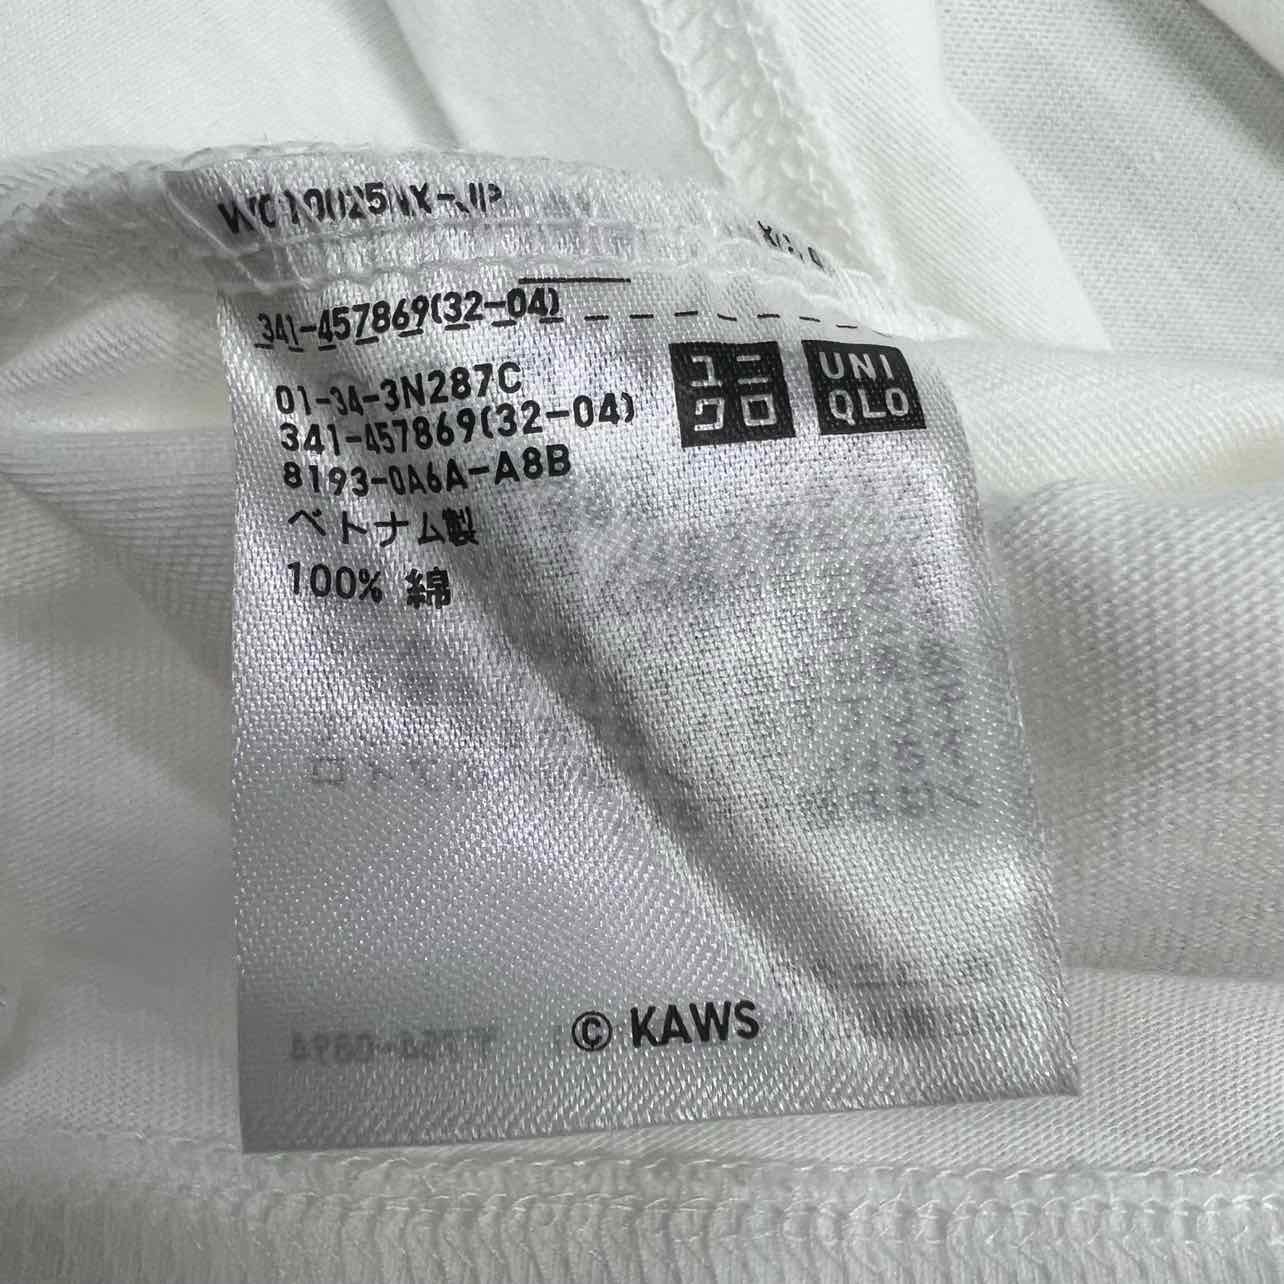 Uniqlo T-Shirt &quot;KAWS PEACE FOR ALL&quot; White New Size M